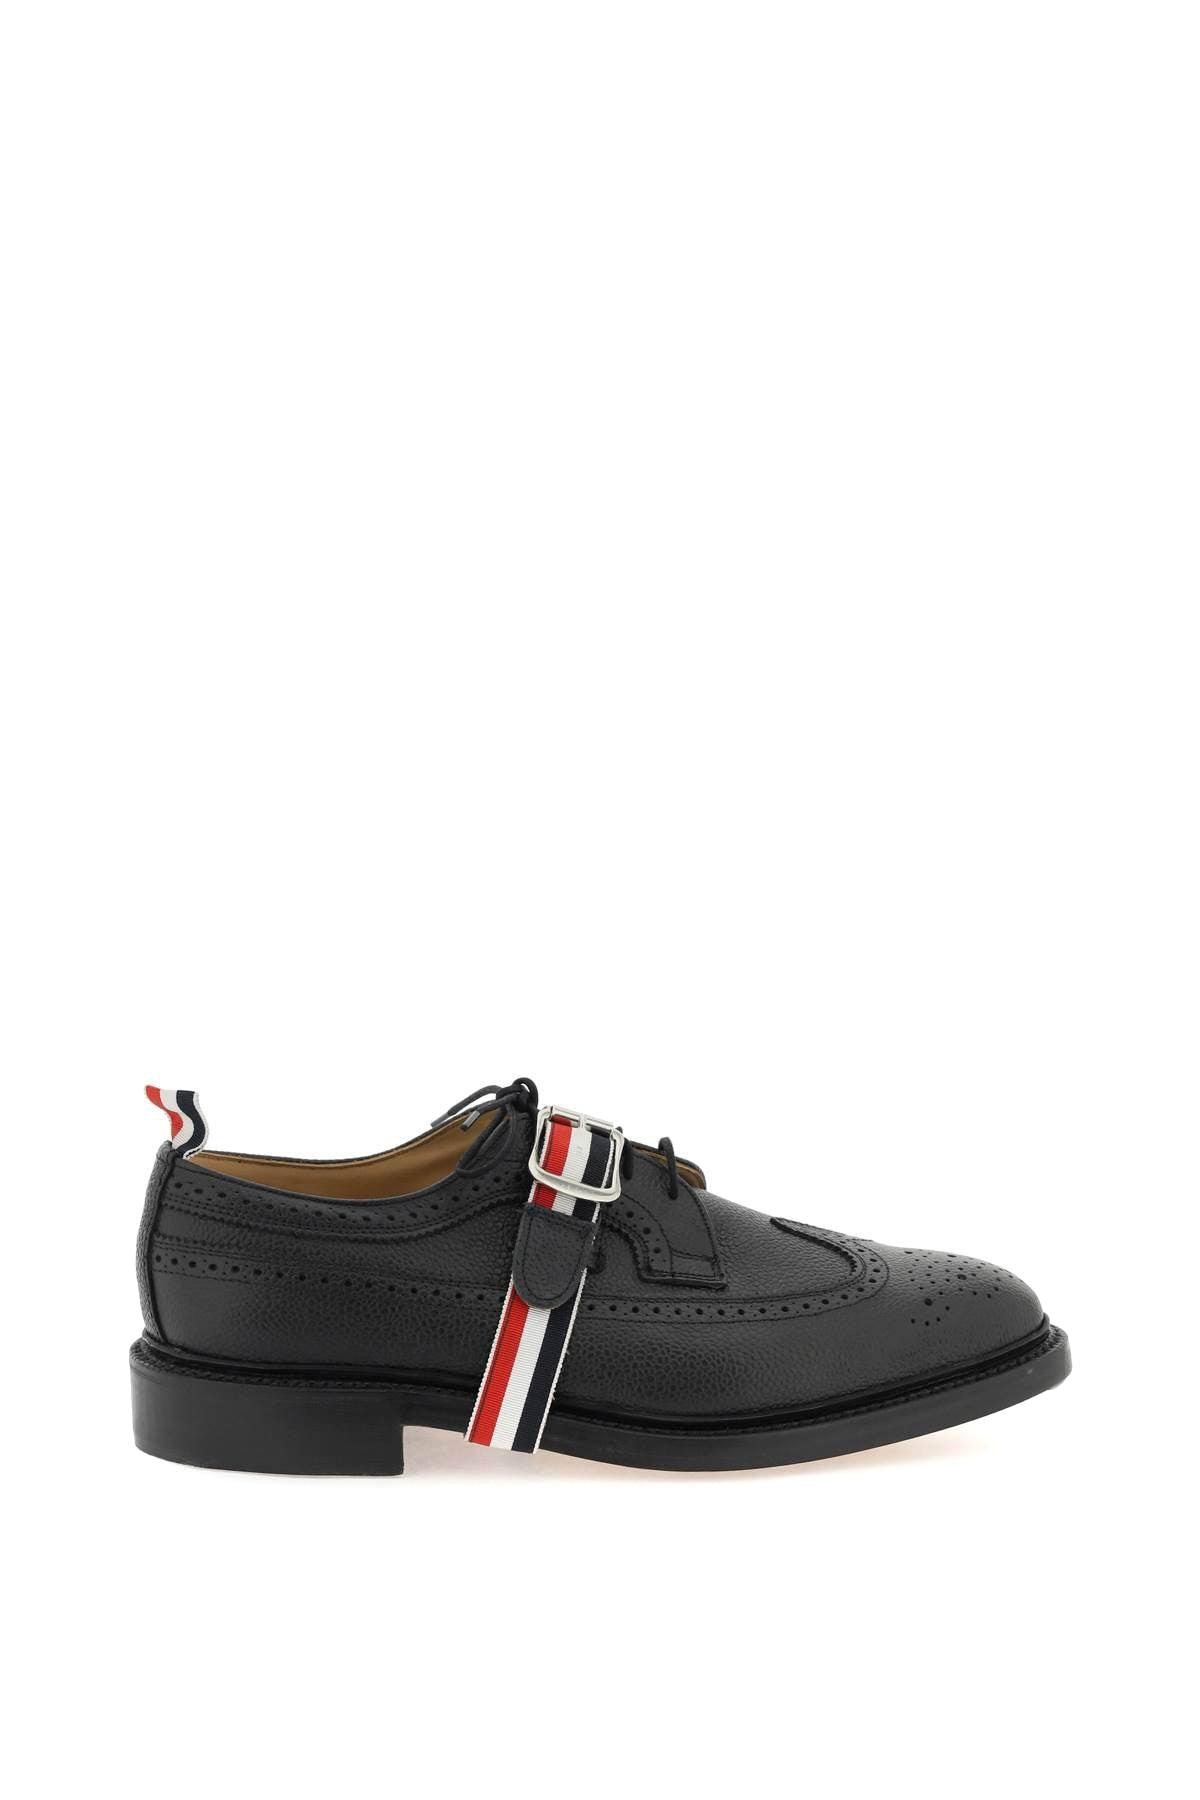 Thom Browne Grained Leather Wingtip With Tricolour Ribbon in Black for